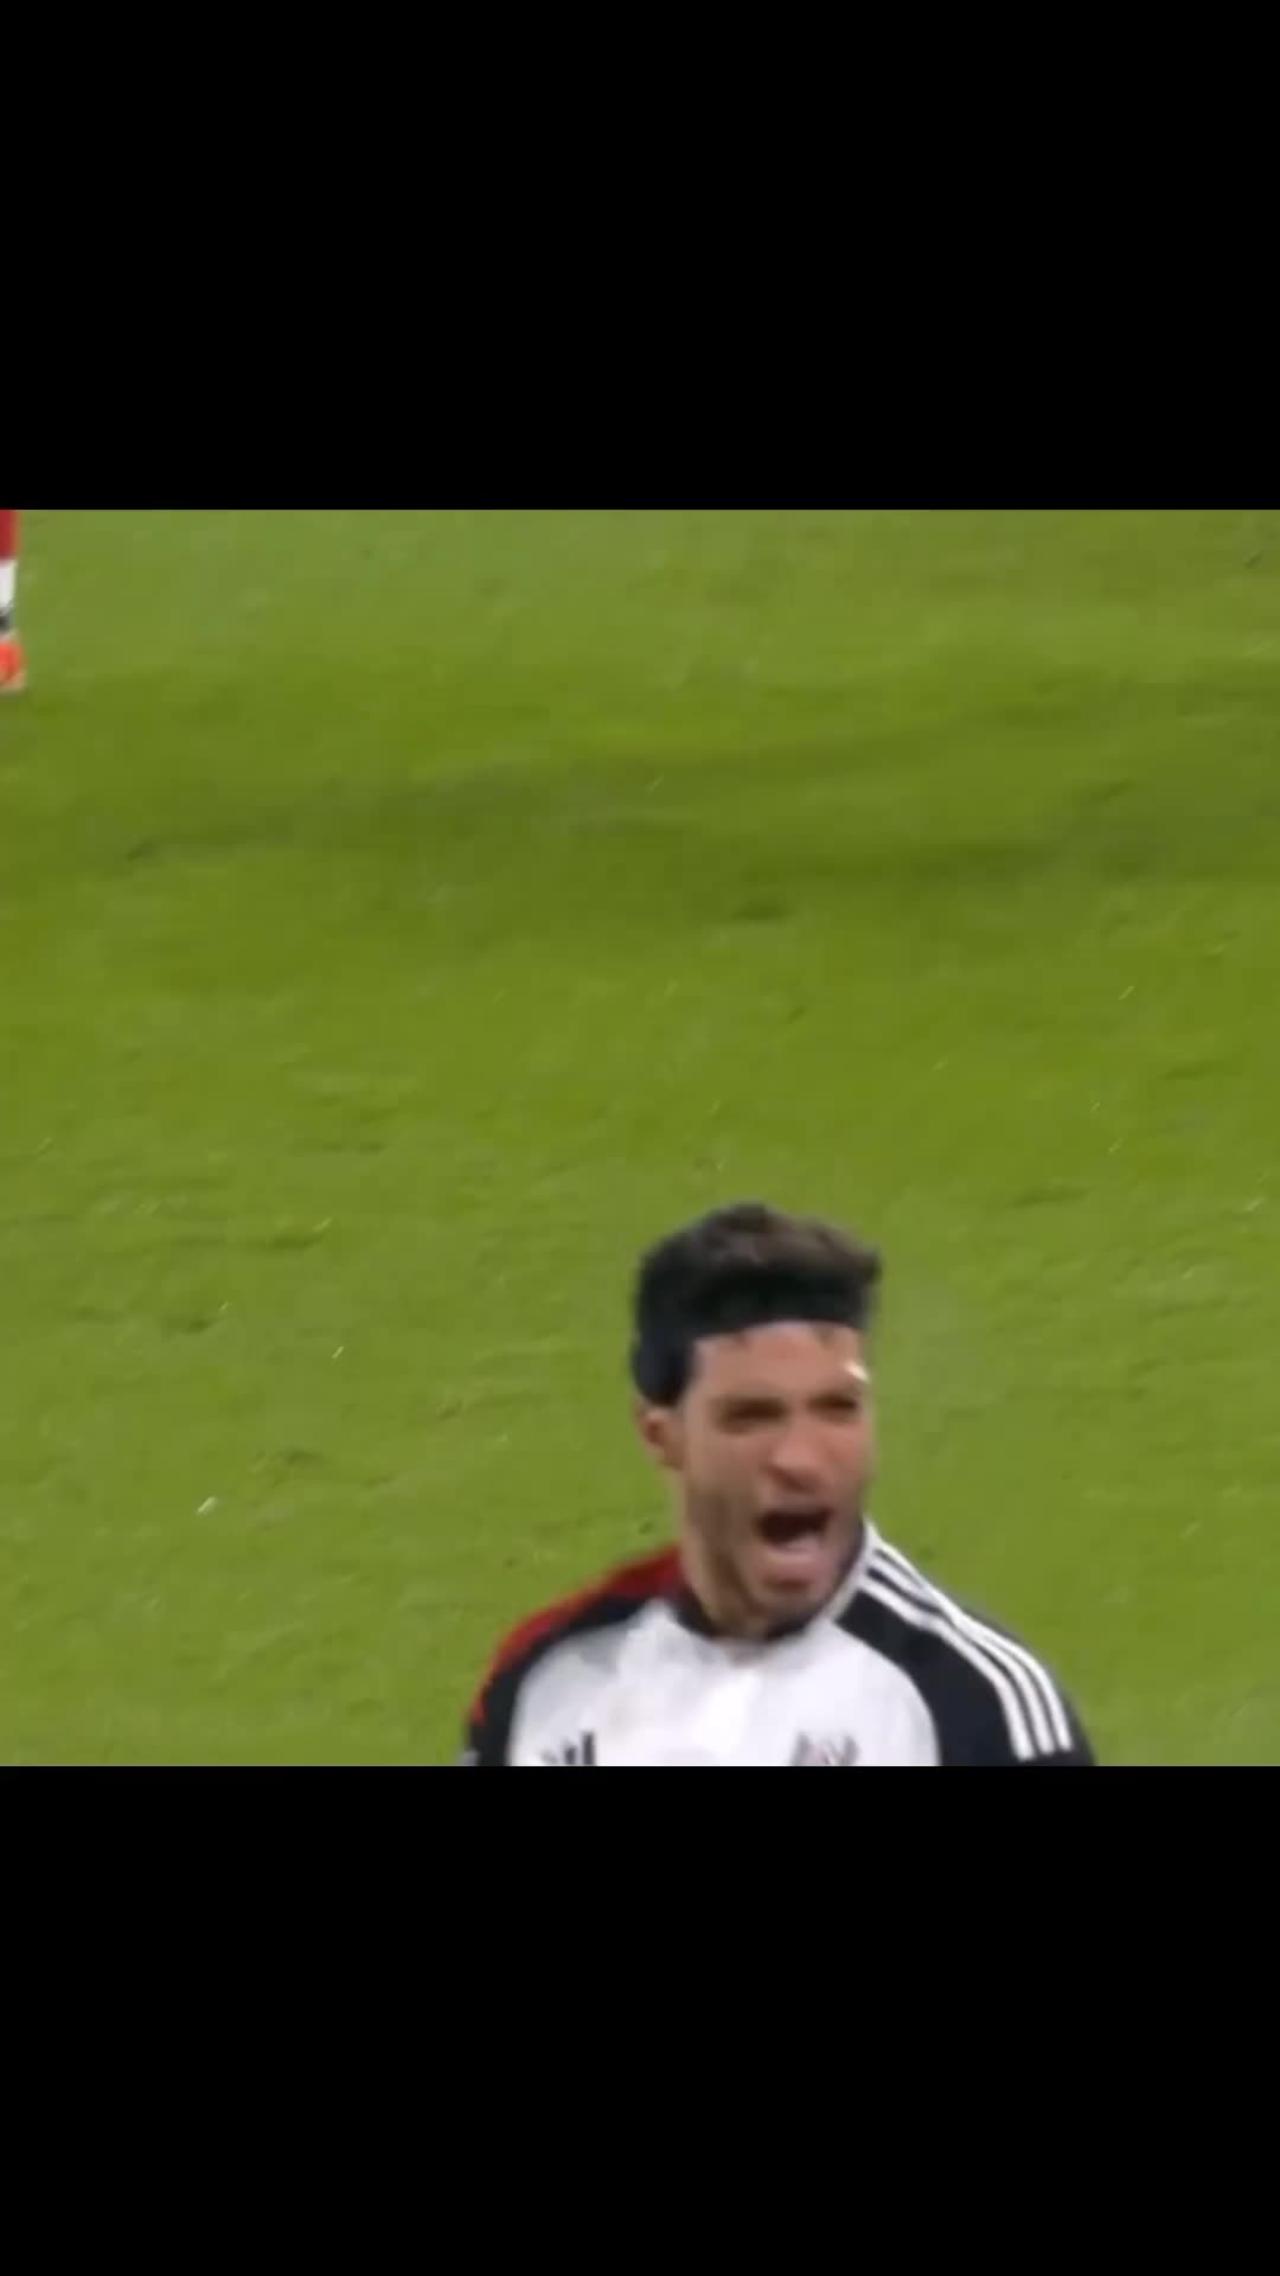 Mexico's Raul Jimenez scores a crazy goal with Fulham in the Premier League